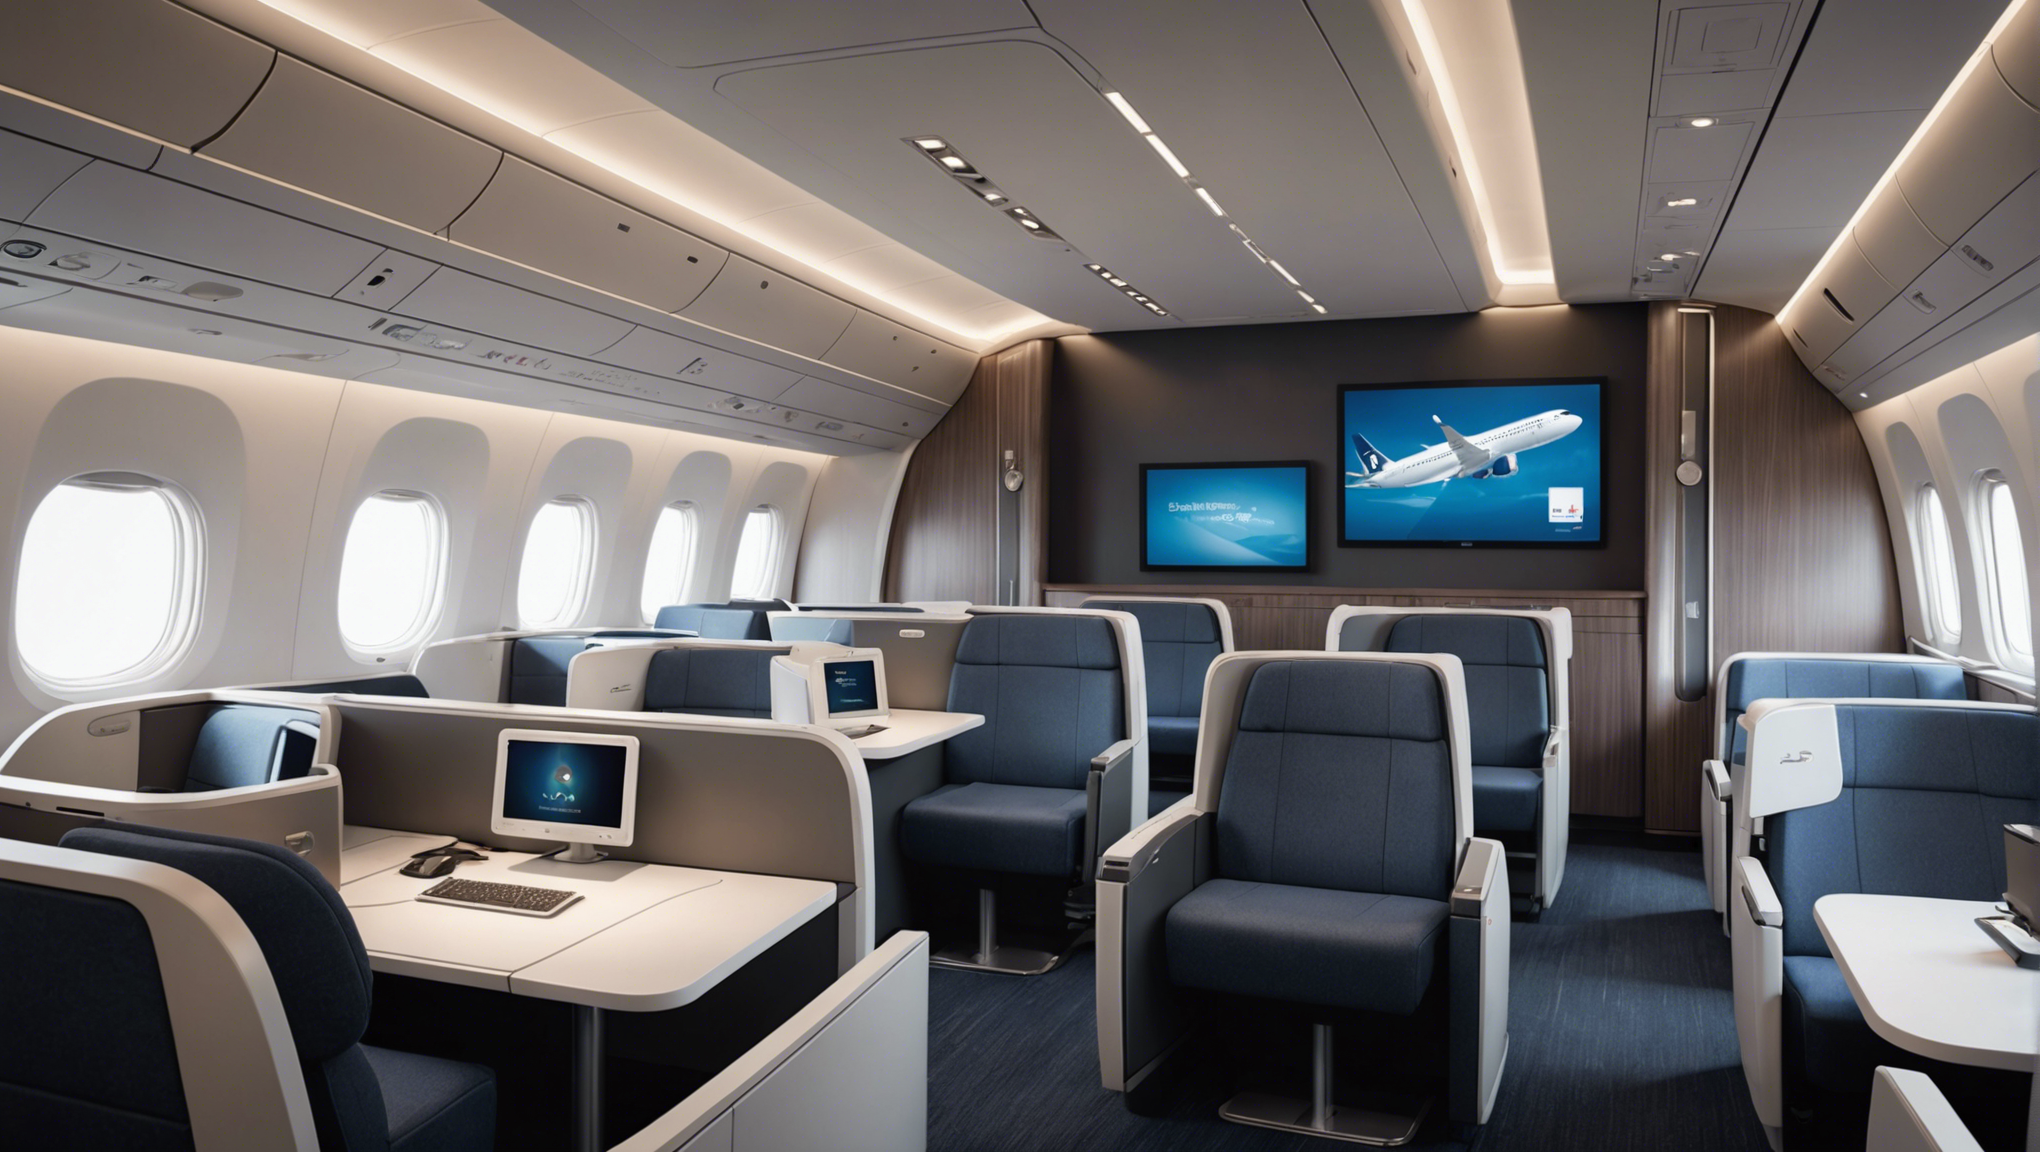 discover the wonders of business class with these 5 incredible seats designed by stelia.